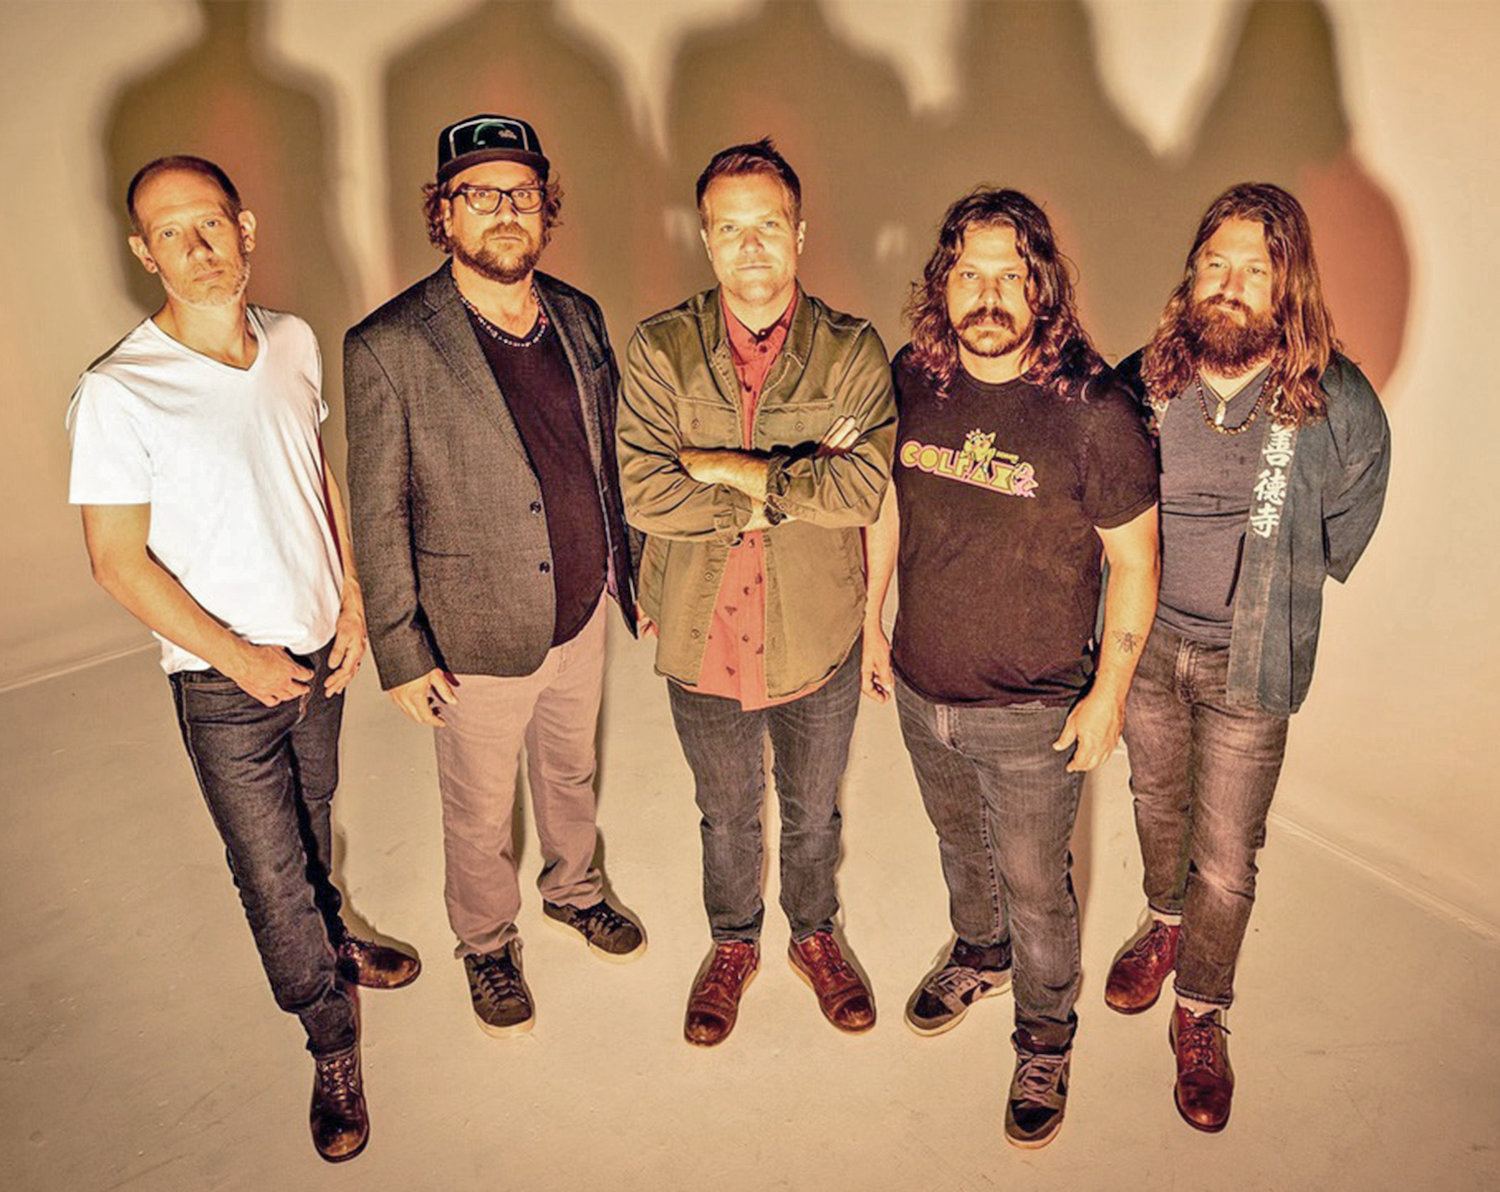 Greensky Bluegrass performs at 7 p.m. Jan. 15 at the Stanley Theatre in Utica.